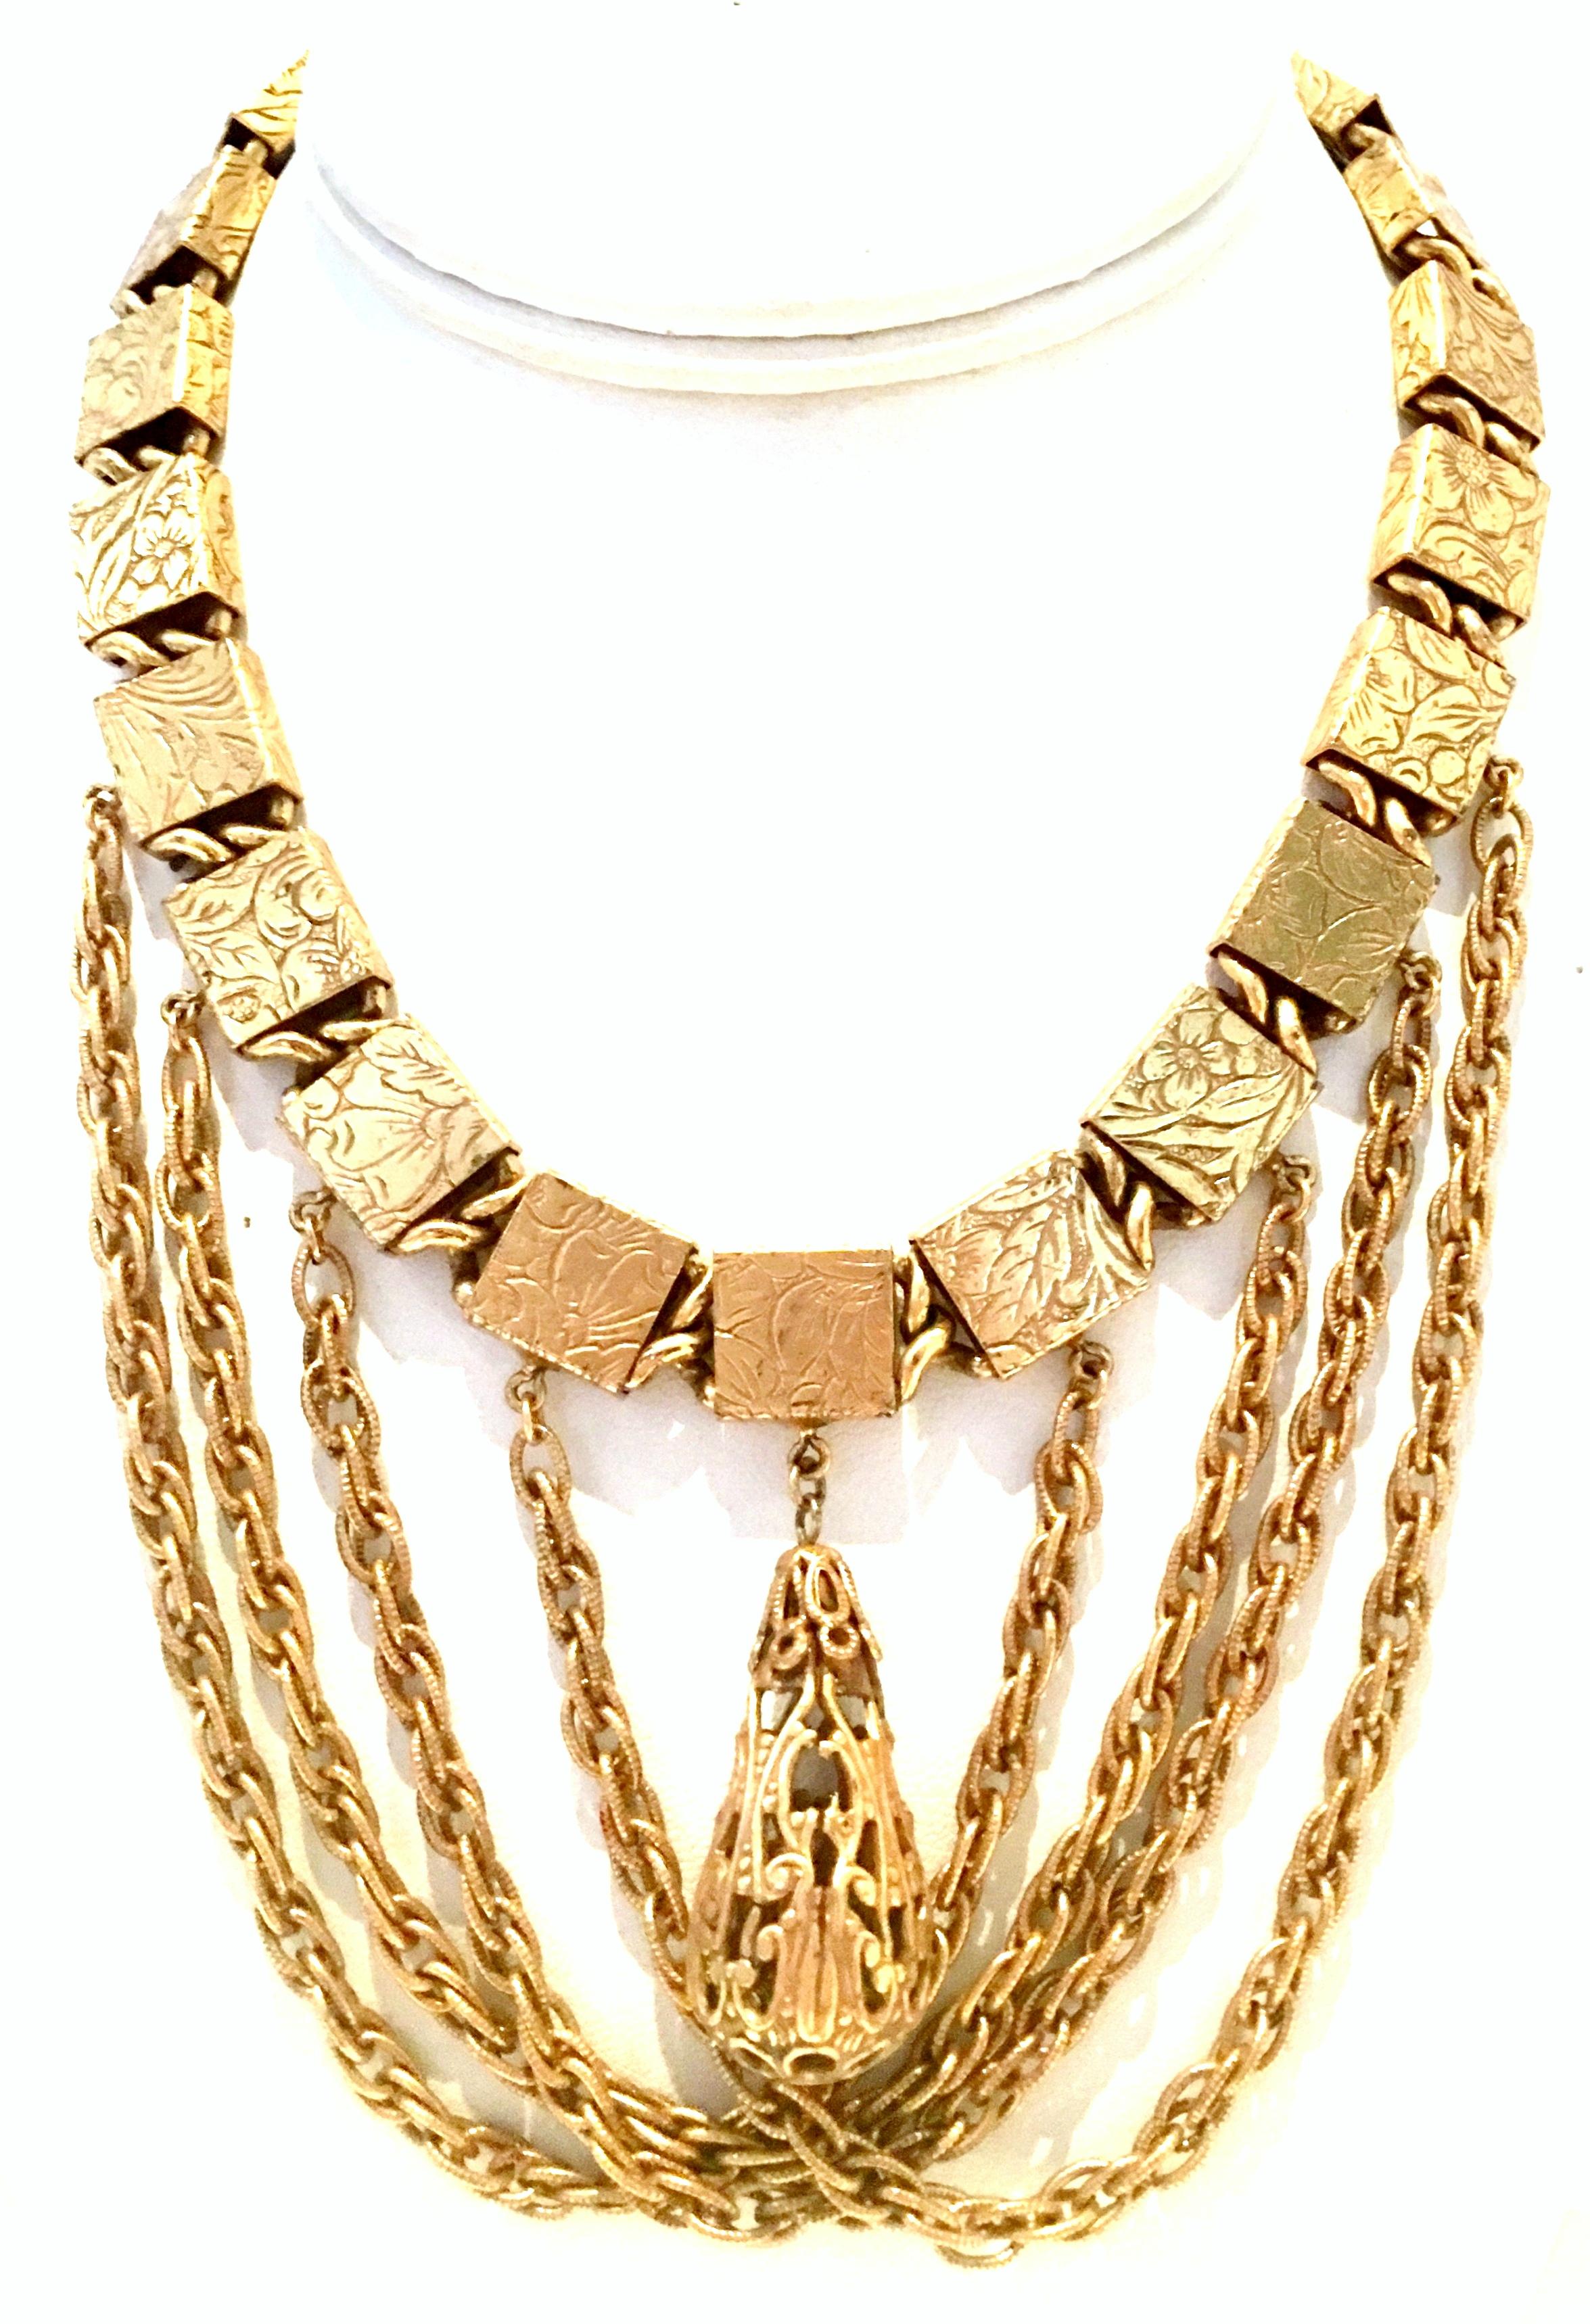 20th Century Art Nouveau Gold Book Chain Choker Style Necklace & Earrings S/3 In Good Condition For Sale In West Palm Beach, FL